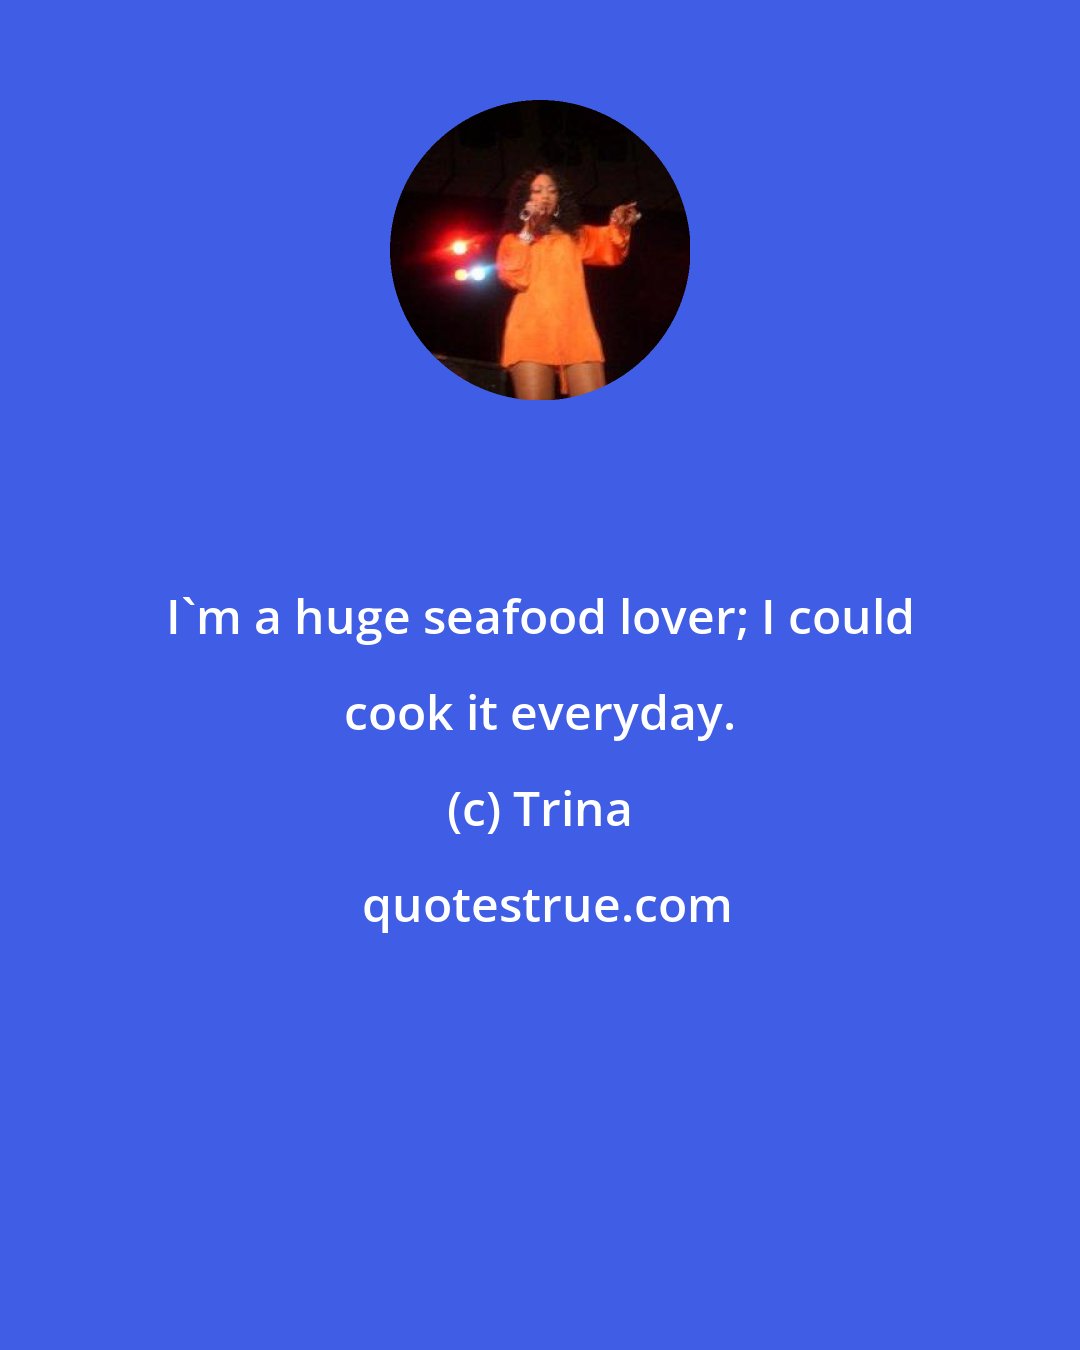 Trina: I'm a huge seafood lover; I could cook it everyday.